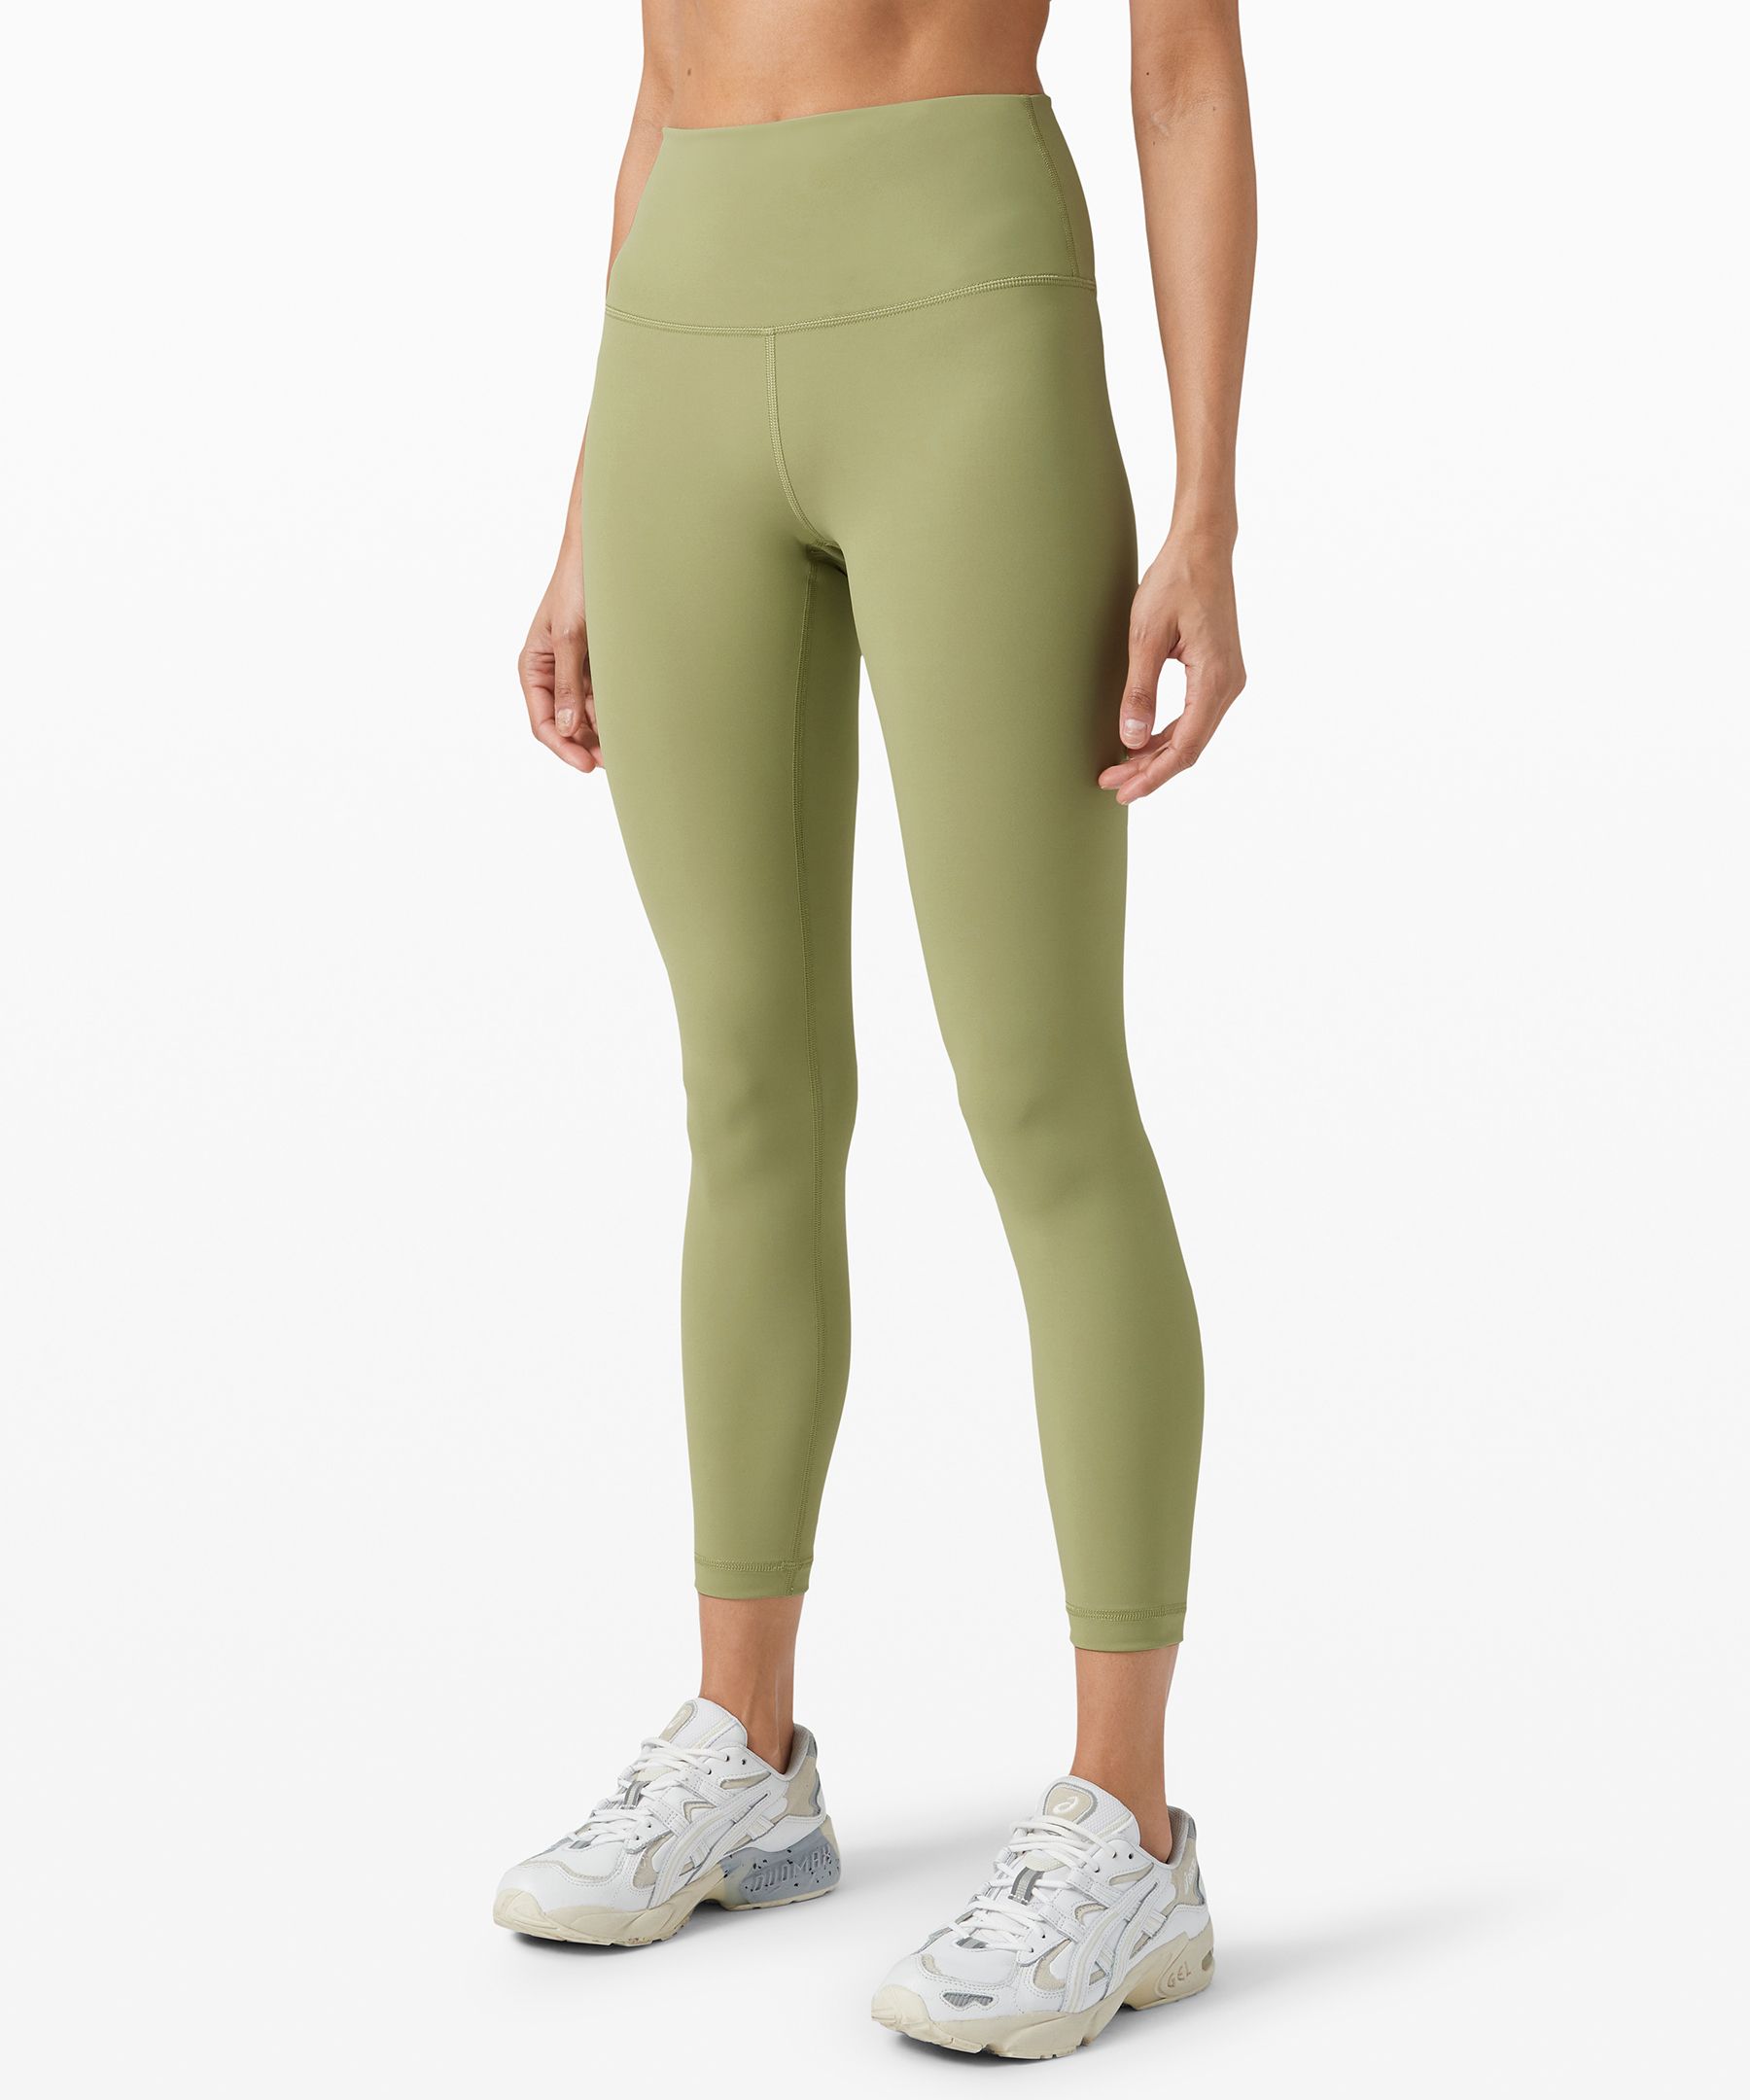 Lululemon Wunder Under High-rise Tights 25" Full-on Luxtreme In Vista Green